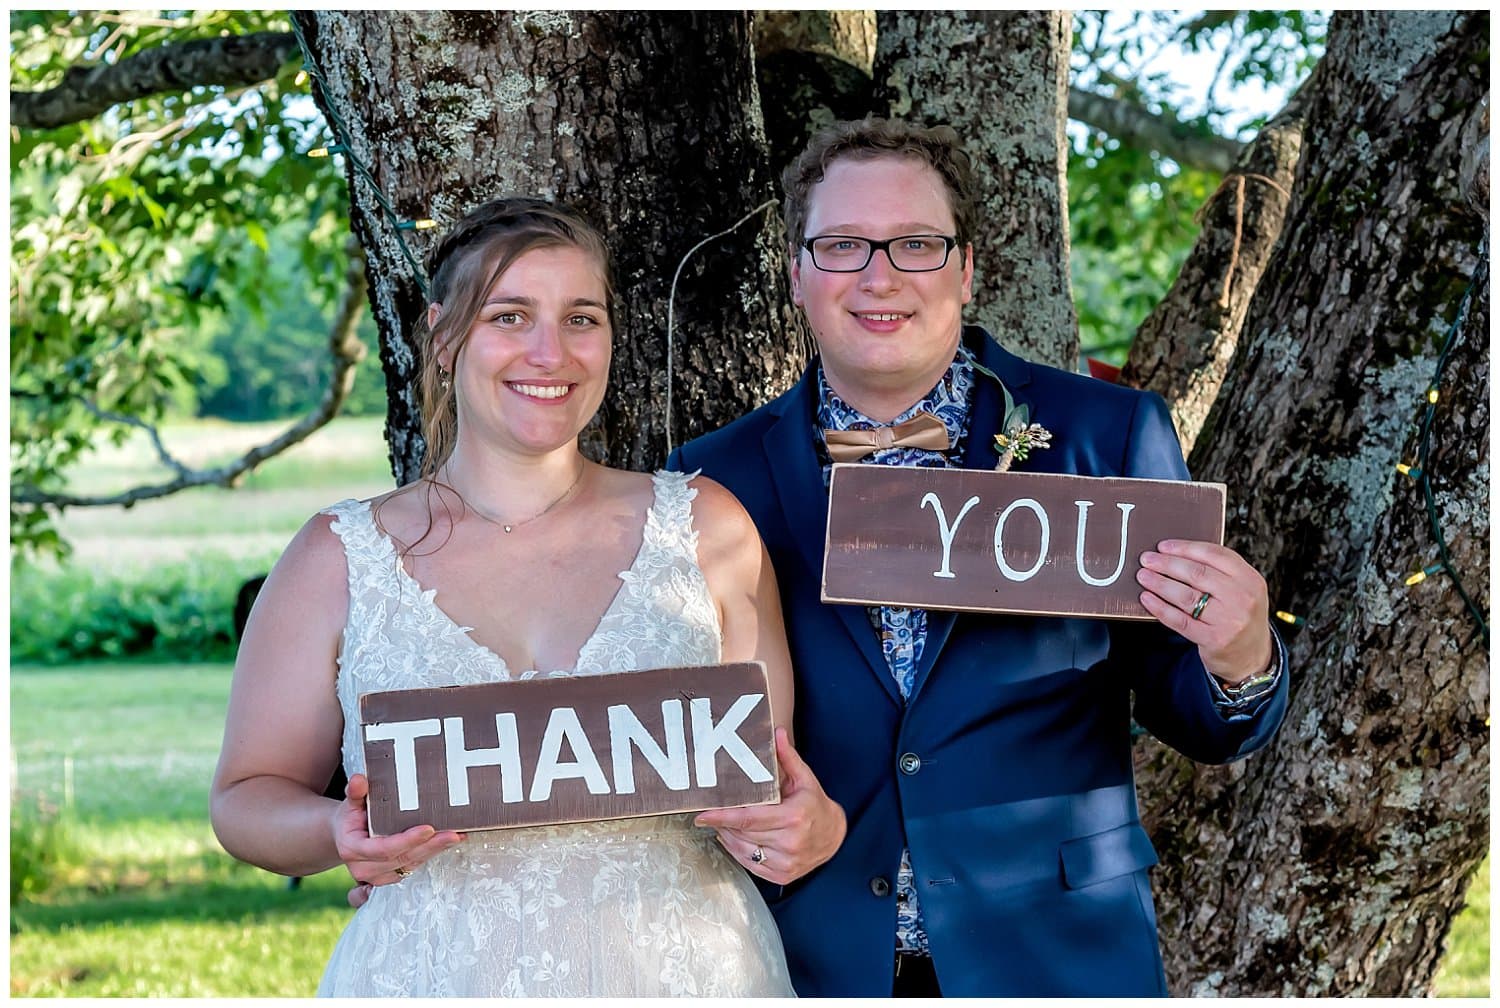 The bride and groom hold rustic wood thank you signs during their wedding reception at the barn at Sadie Belle Fam.